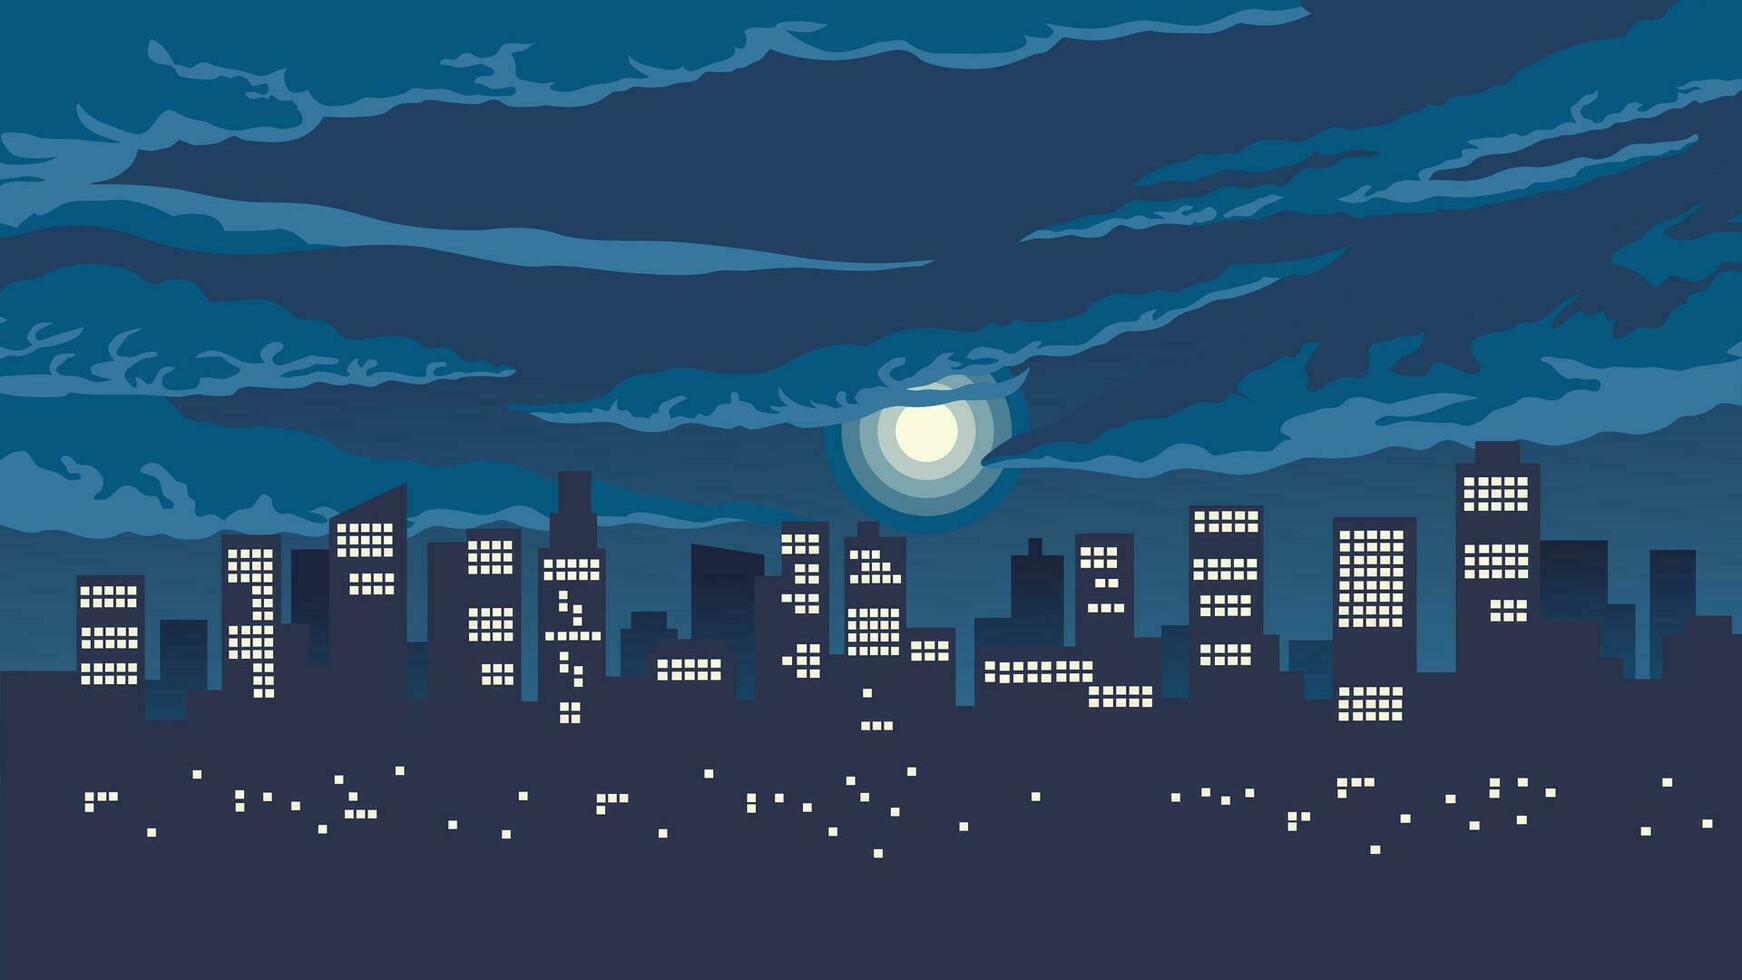 The illustration of the city atmosphere at night is dark blue with dark shades vector